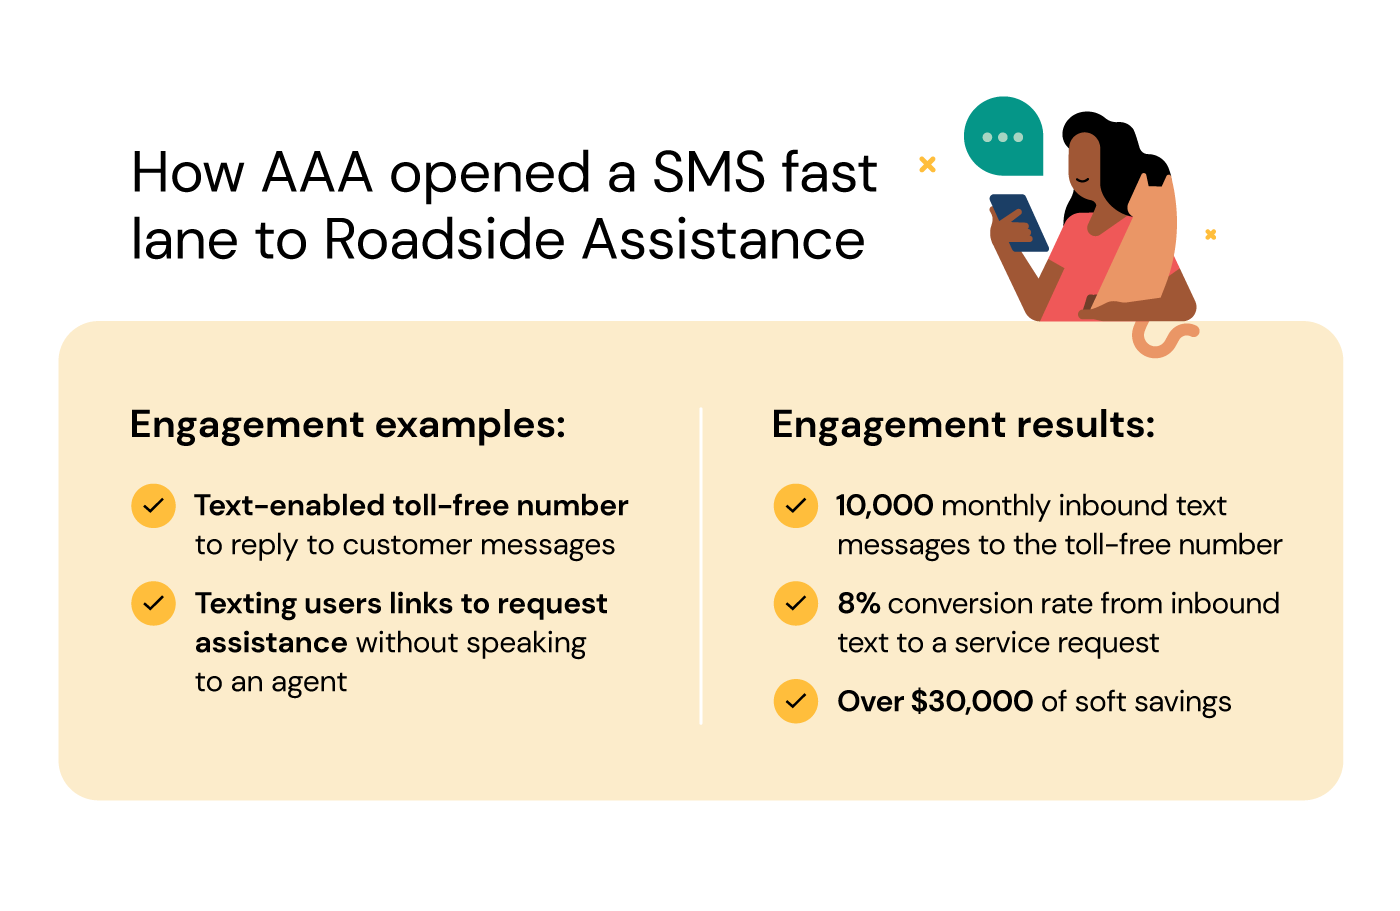 Illustration shows how AAA text-enabled their toll-free number for more engagement and conversions